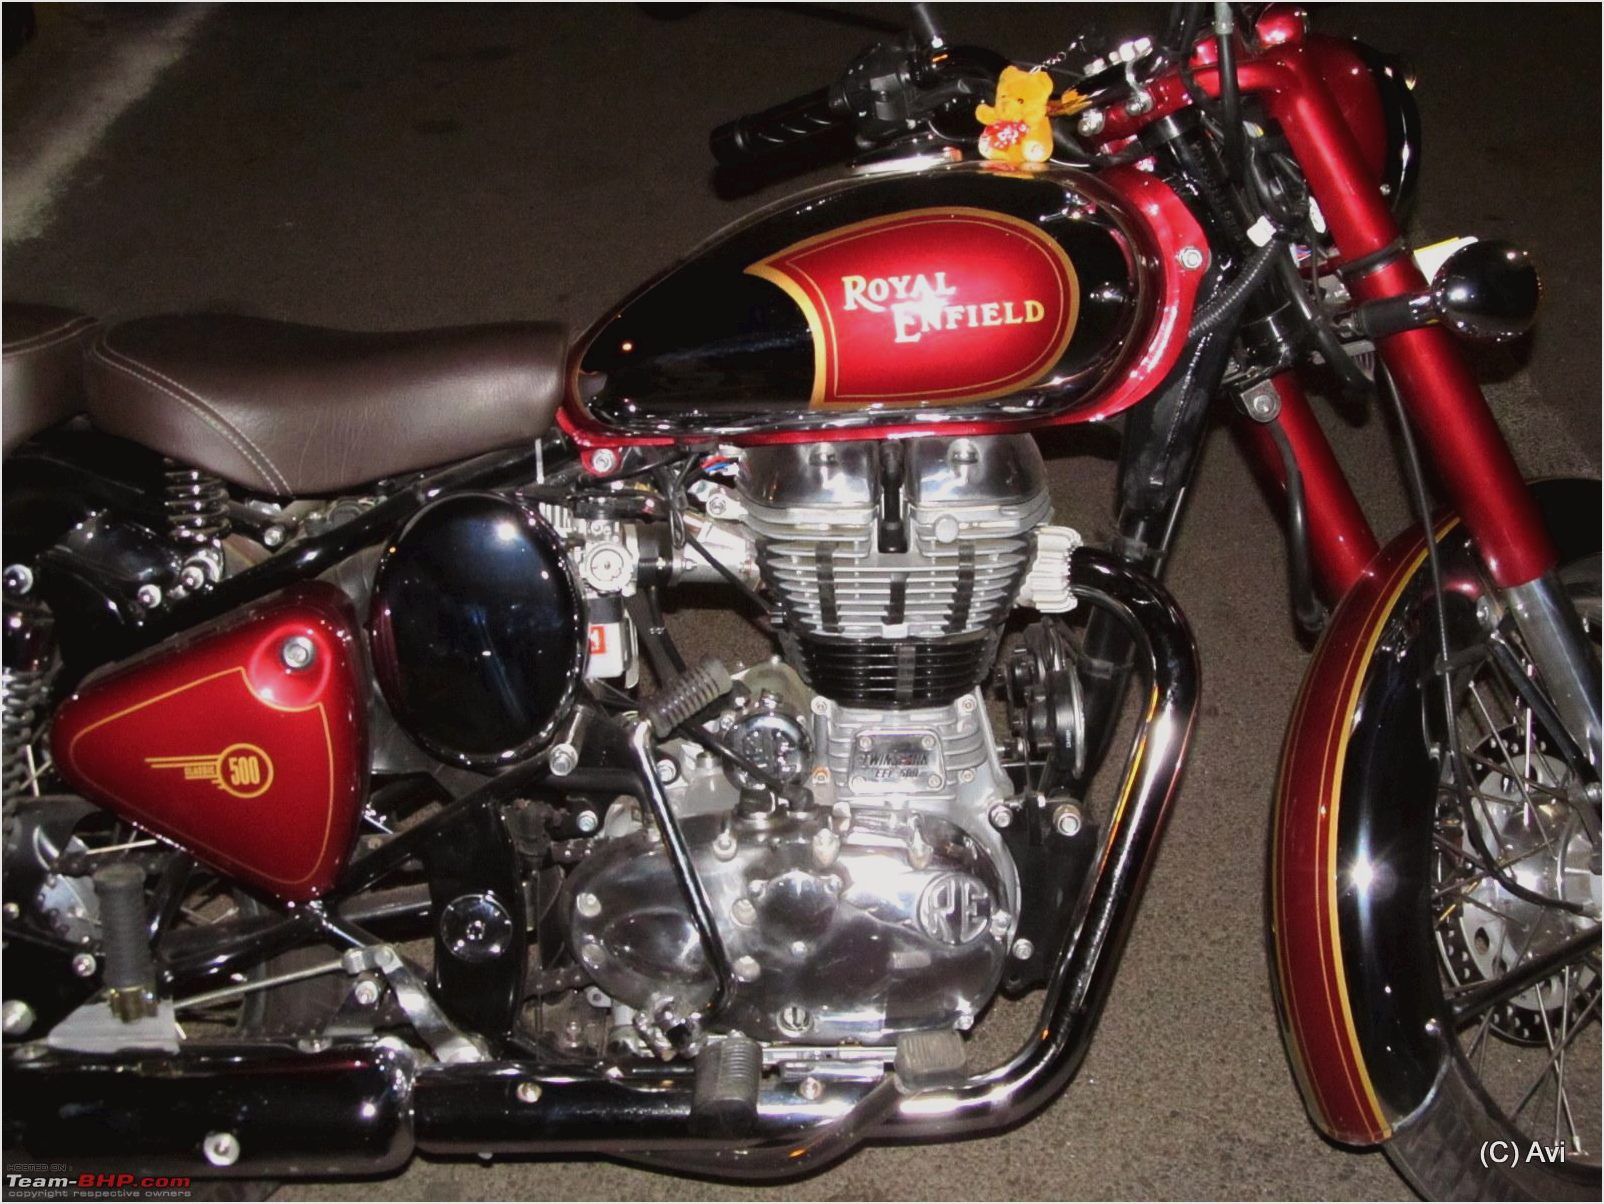 Royal Enfield Bullet 500 Classic pic 6